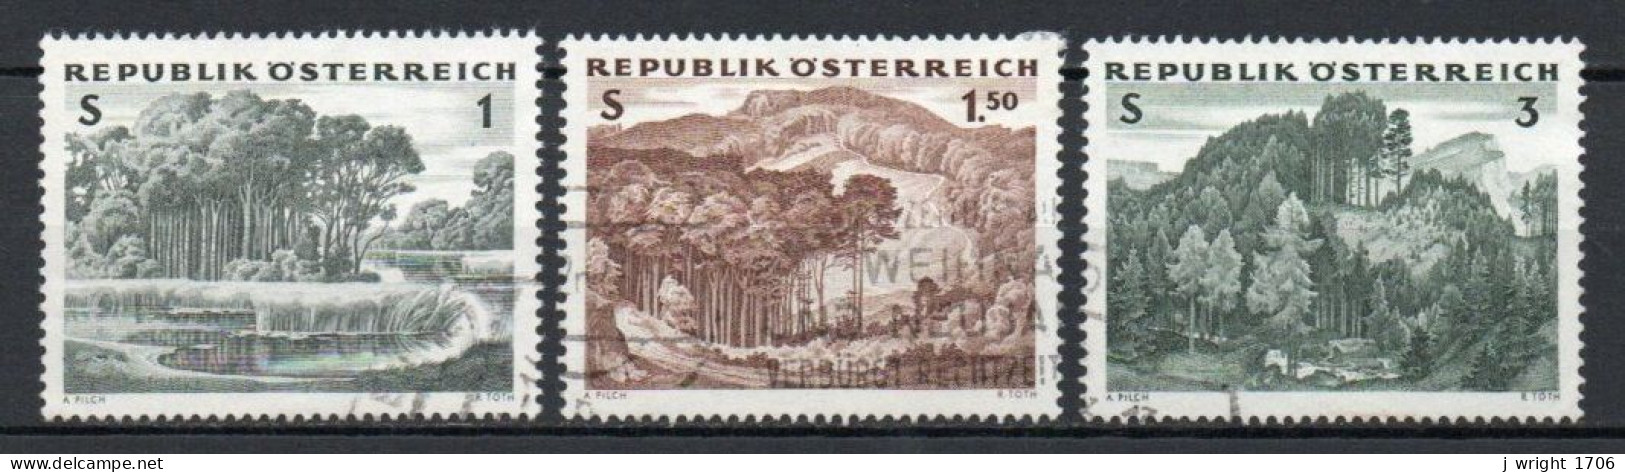 Austria, 1962, Austrian Forests, Set, USED - Used Stamps